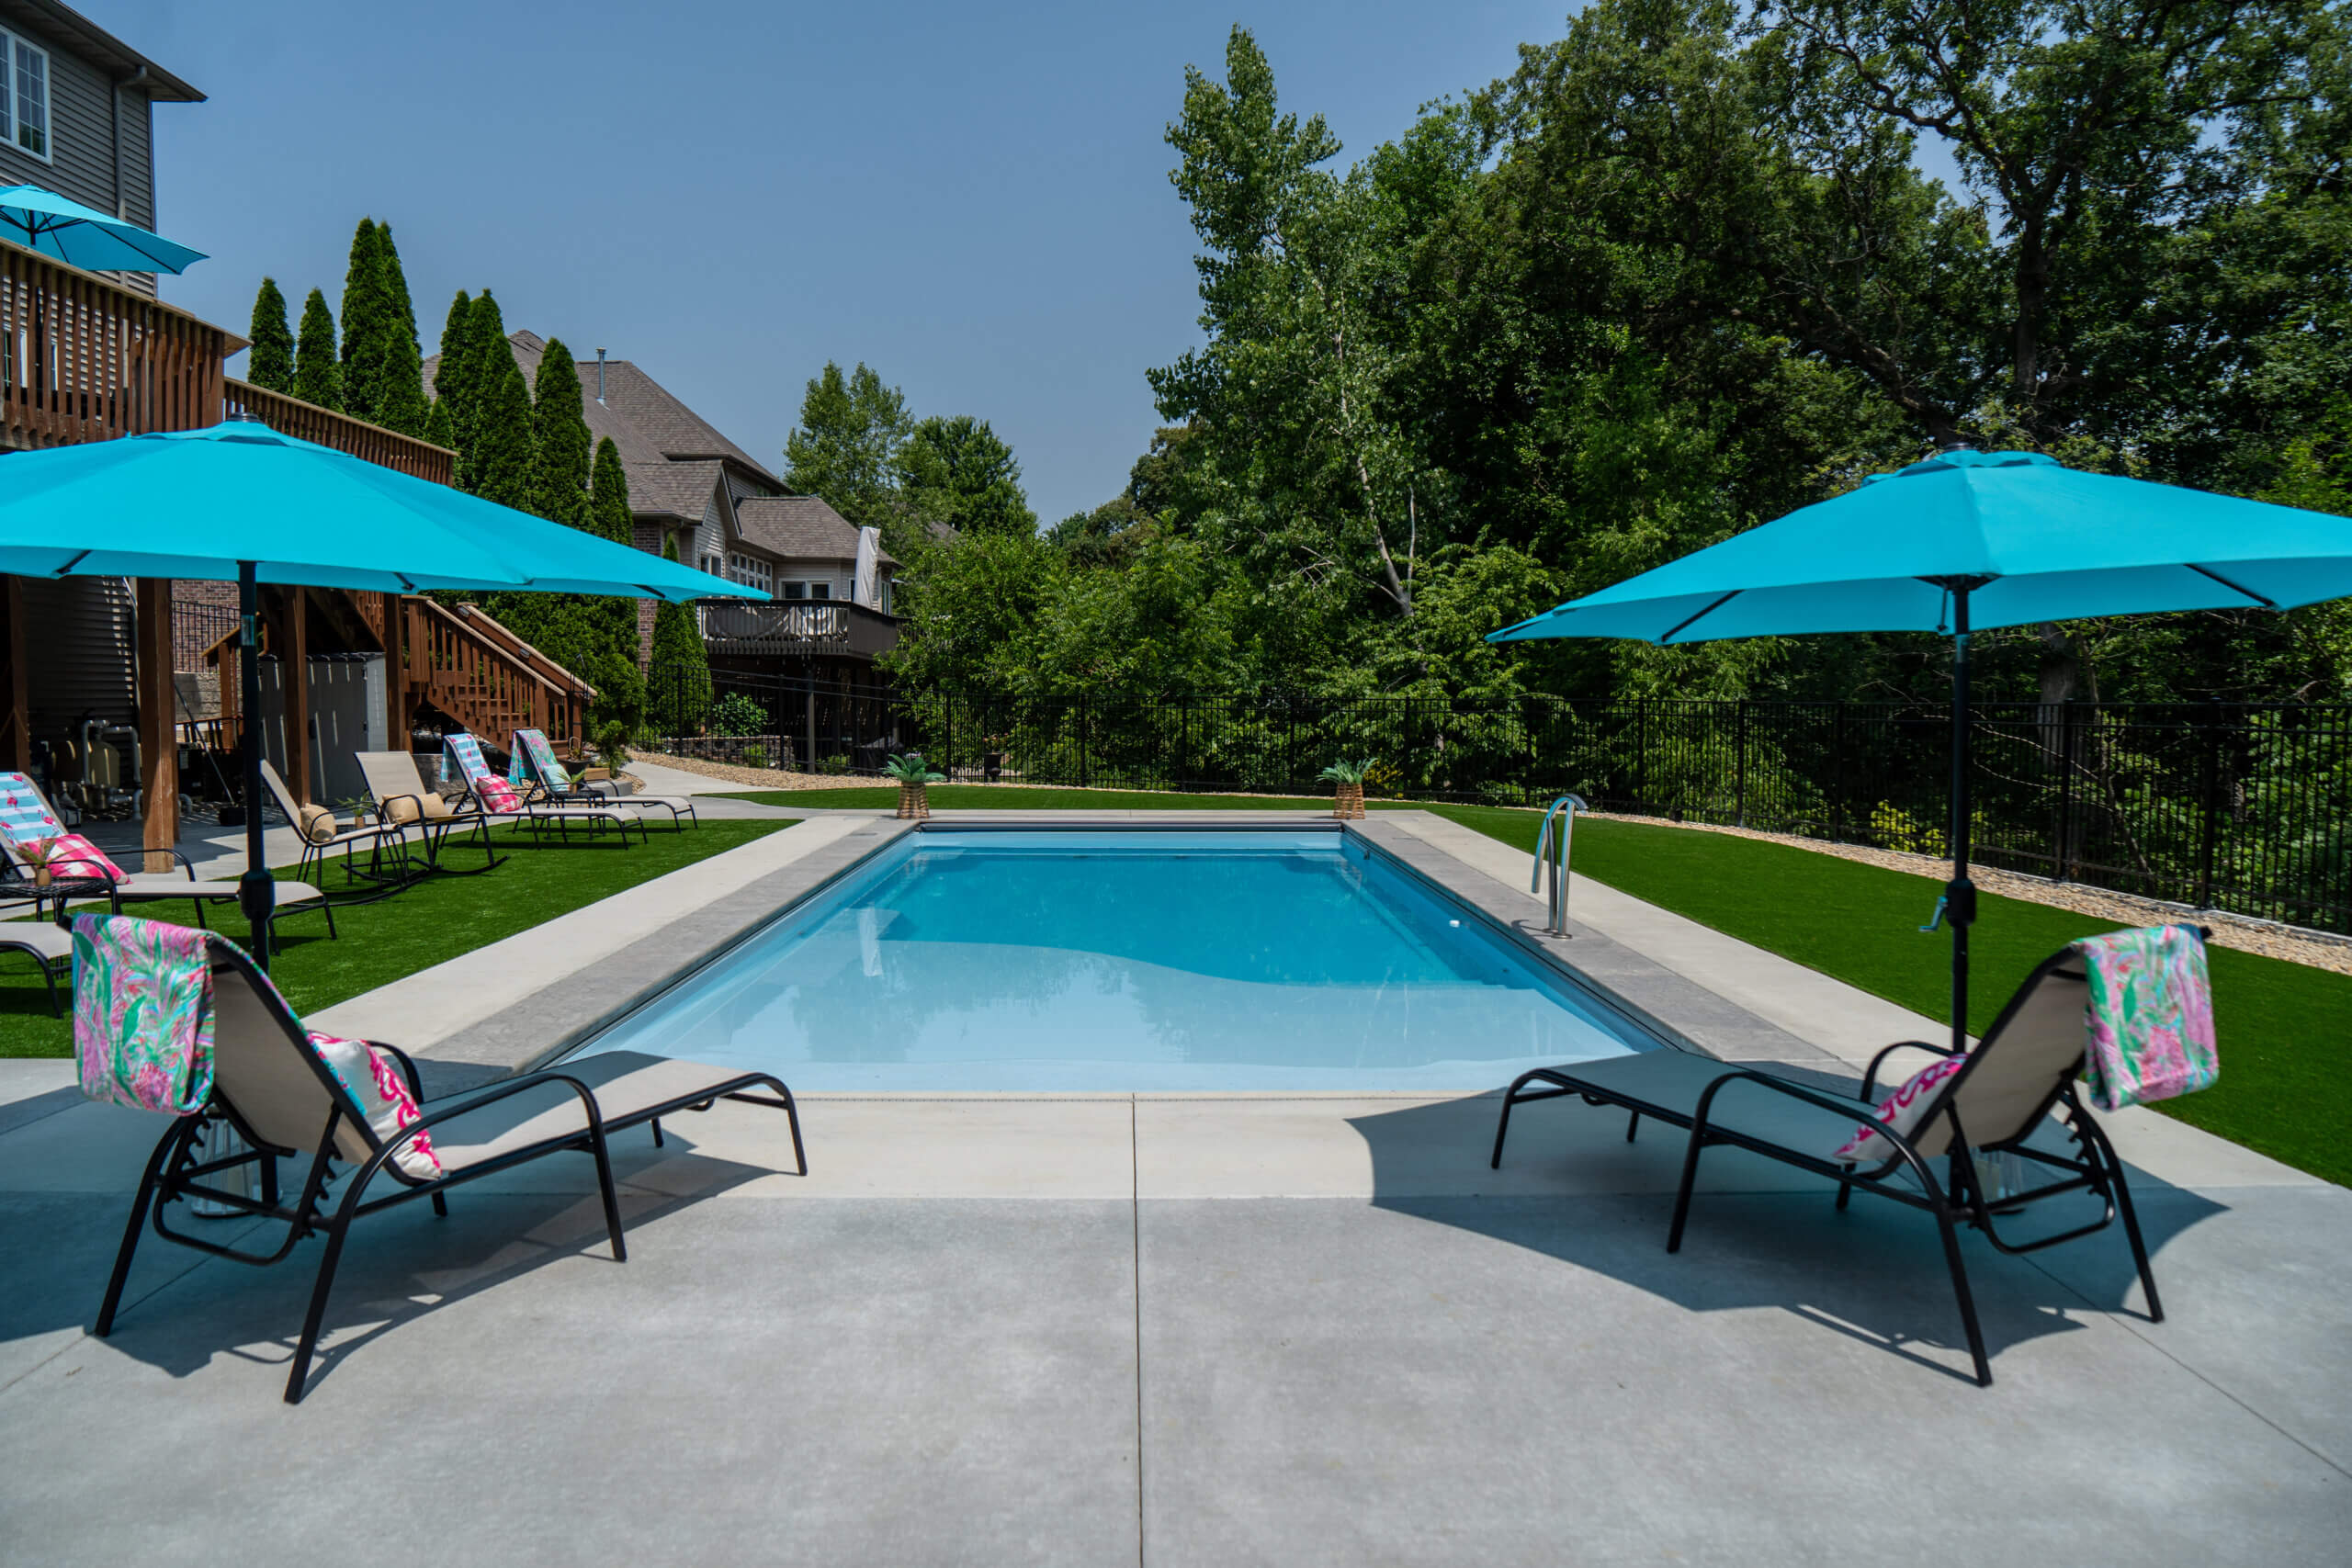 How to Protect Your Pool Water Balance During the Off-season